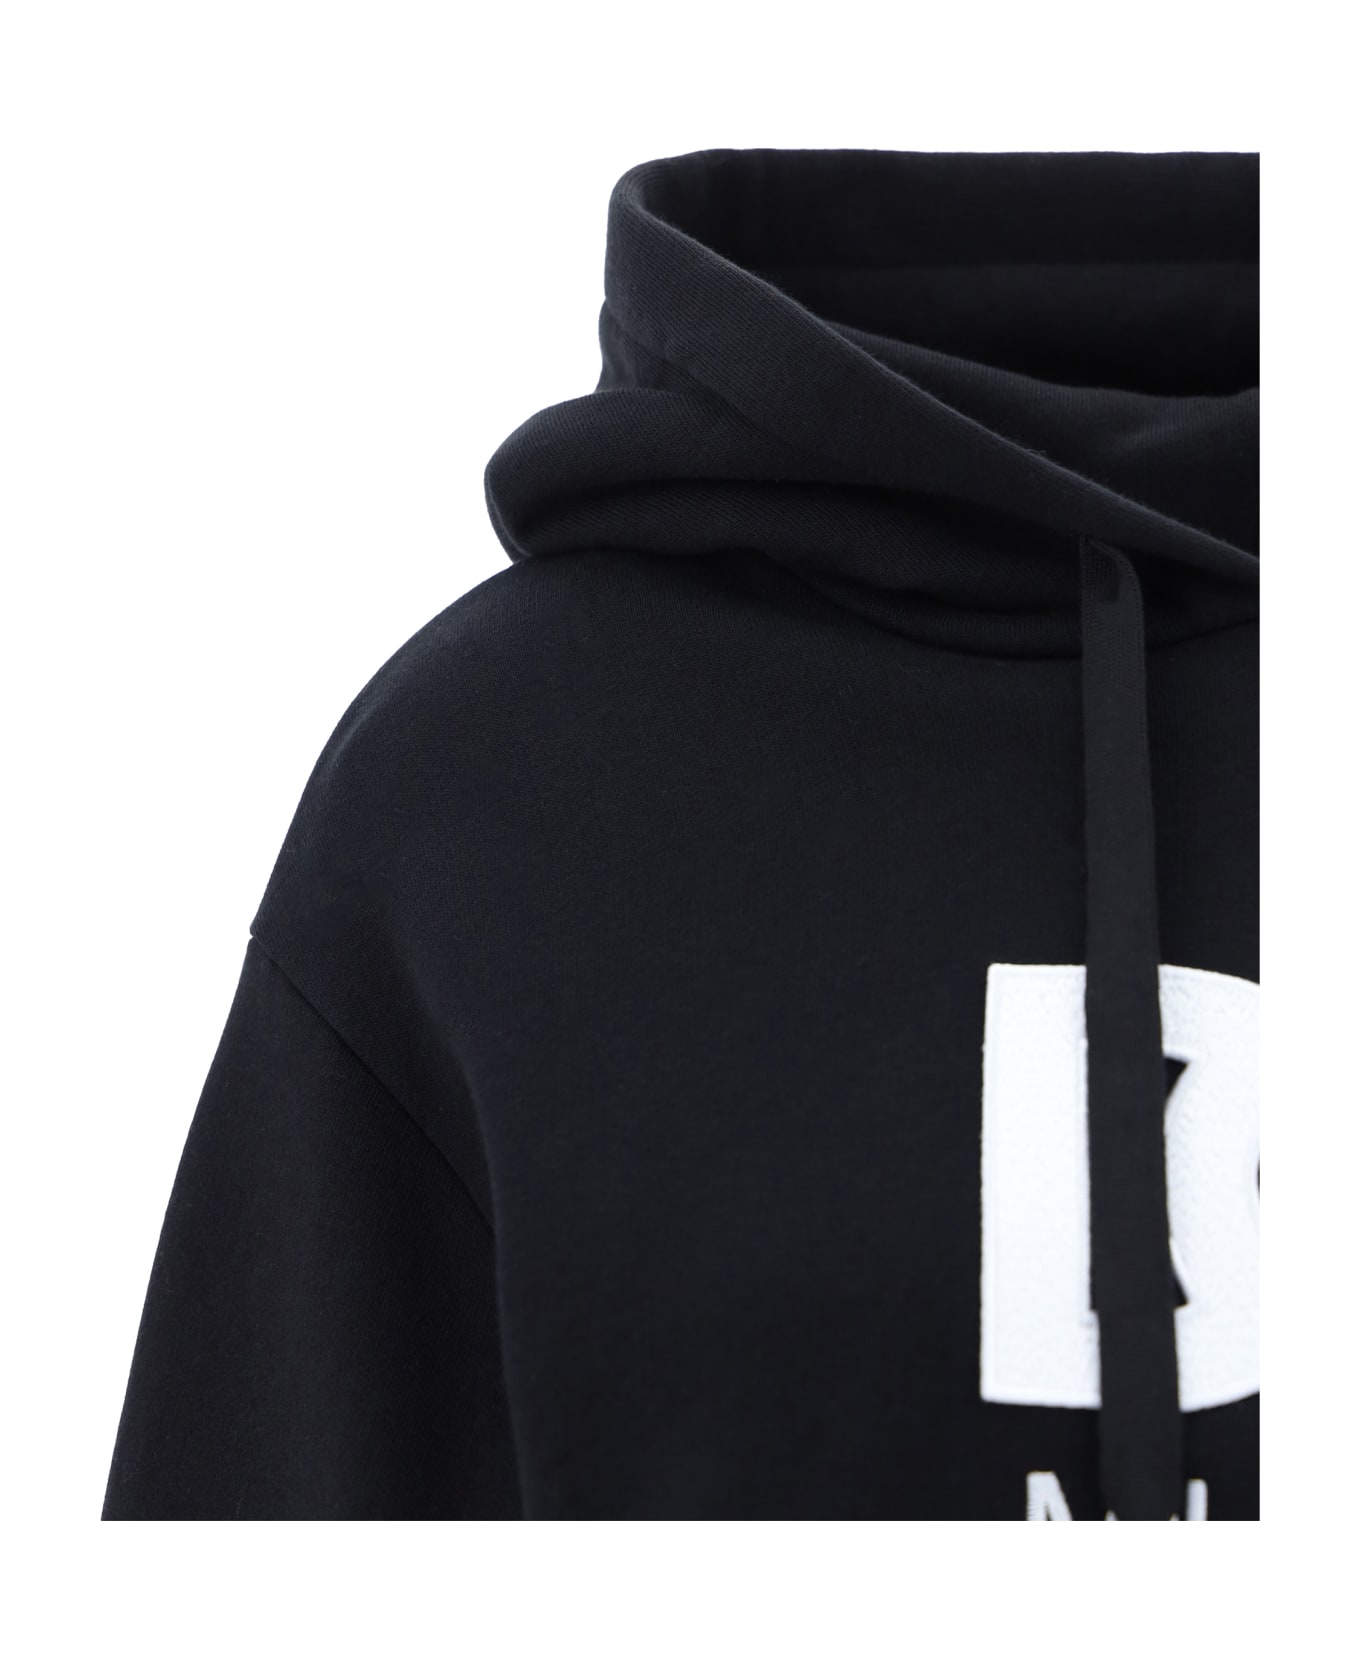 Dolce & Gabbana Logo Embroidery Cropped Hoodie - Nero